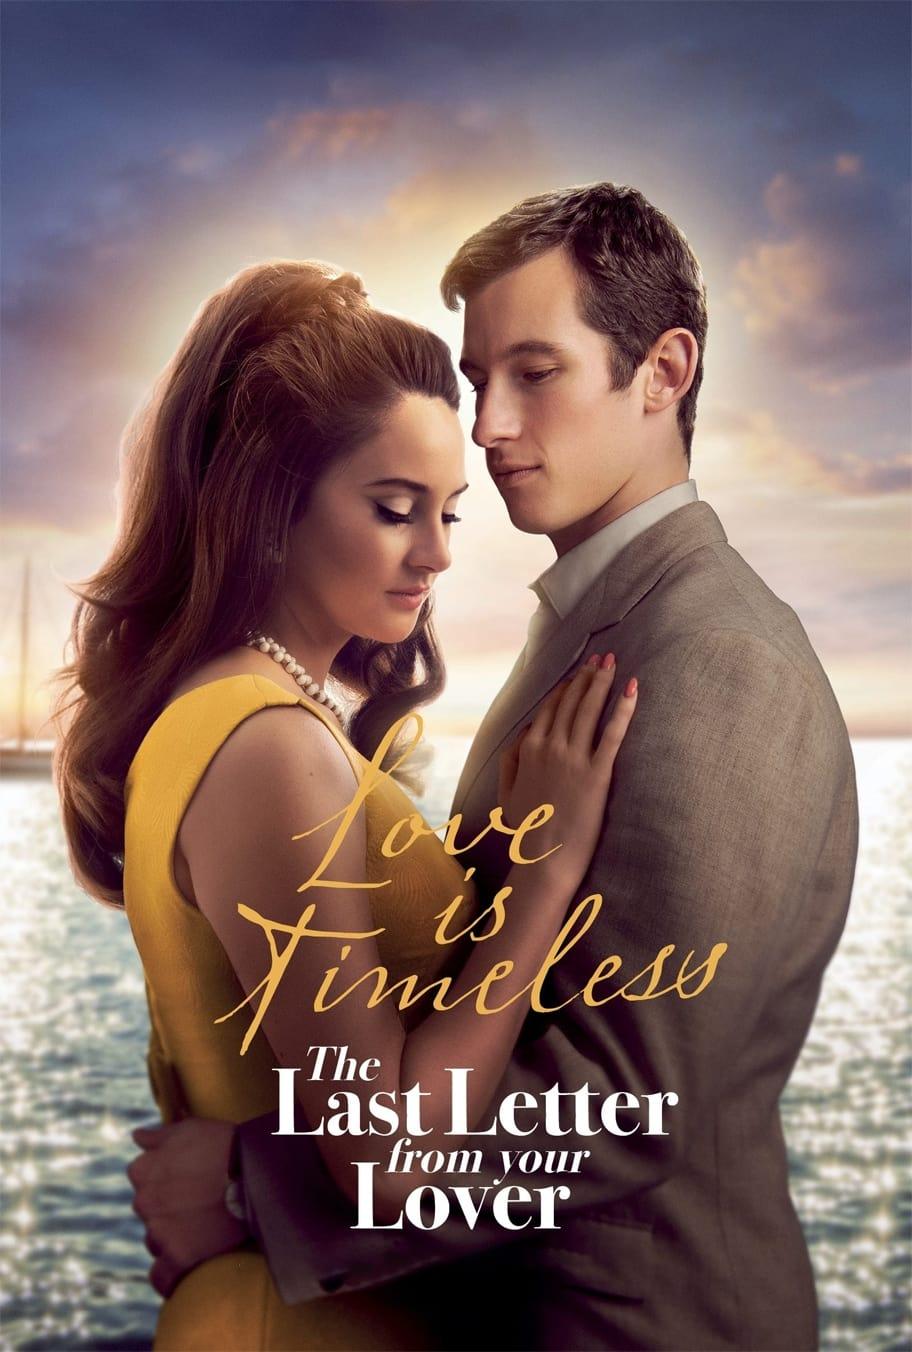 The Last Letter from Your Lover poster